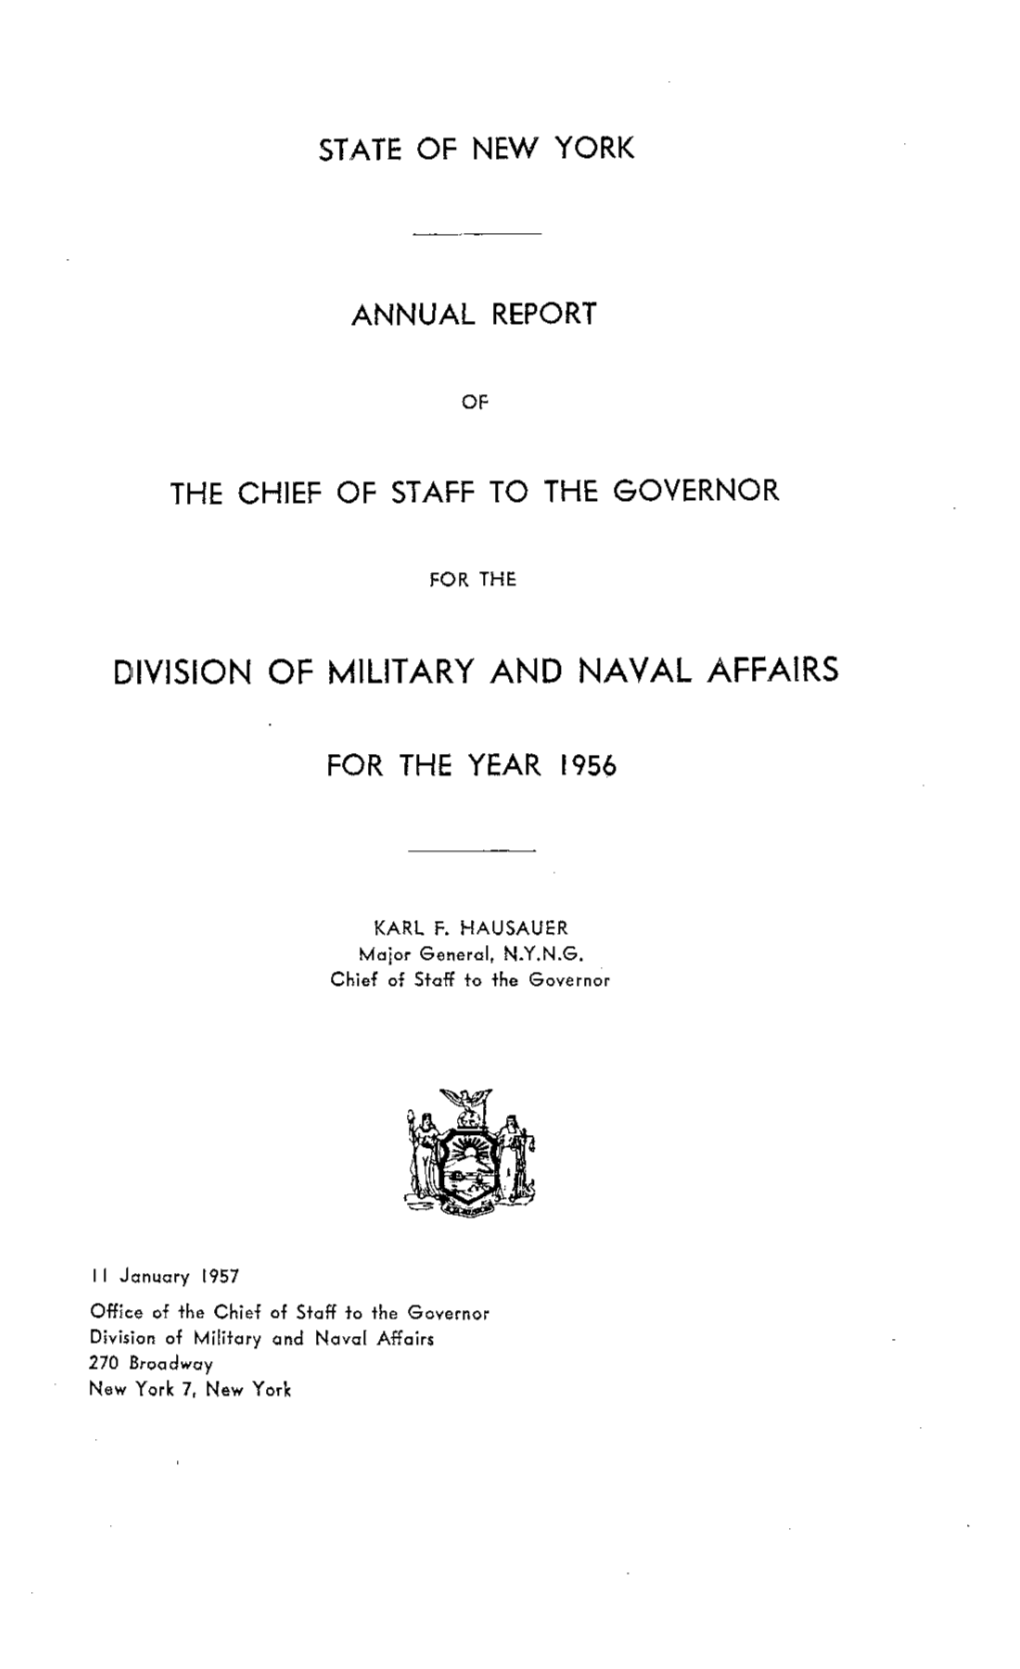 Division of Military and Naval Affairs